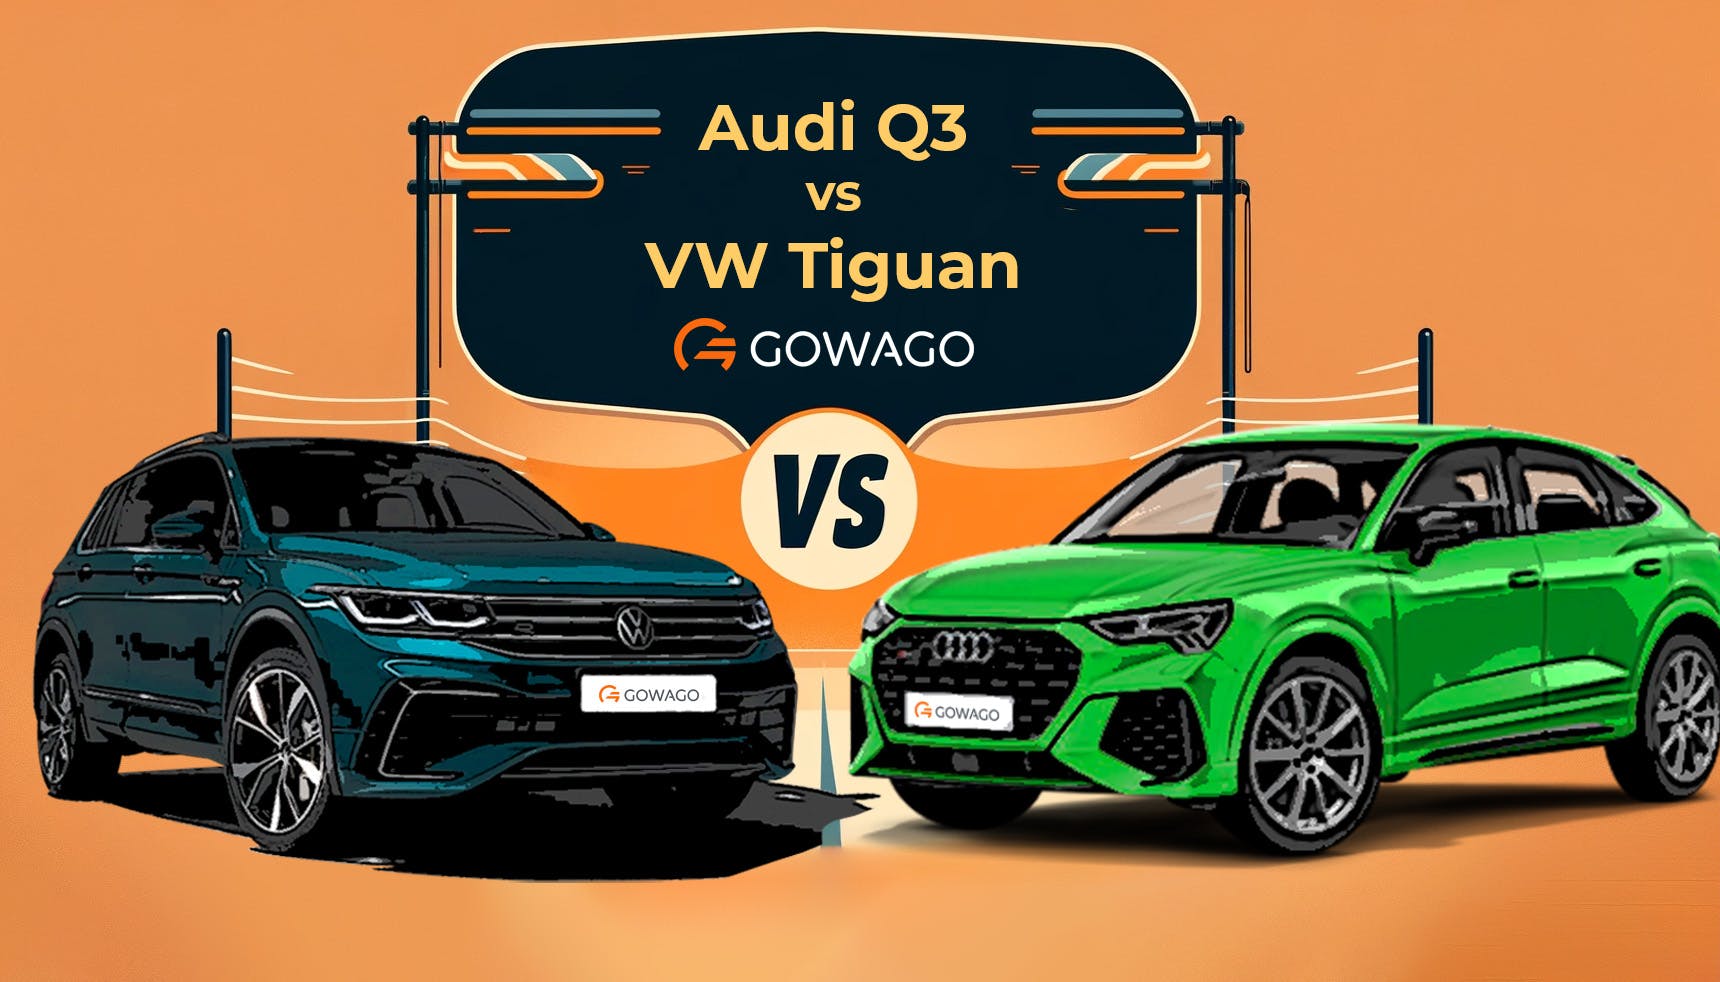 blog item card - VW Tiguan vs Audi Q3: Discover the differences between these SUVs and make the right choice for your next lease!